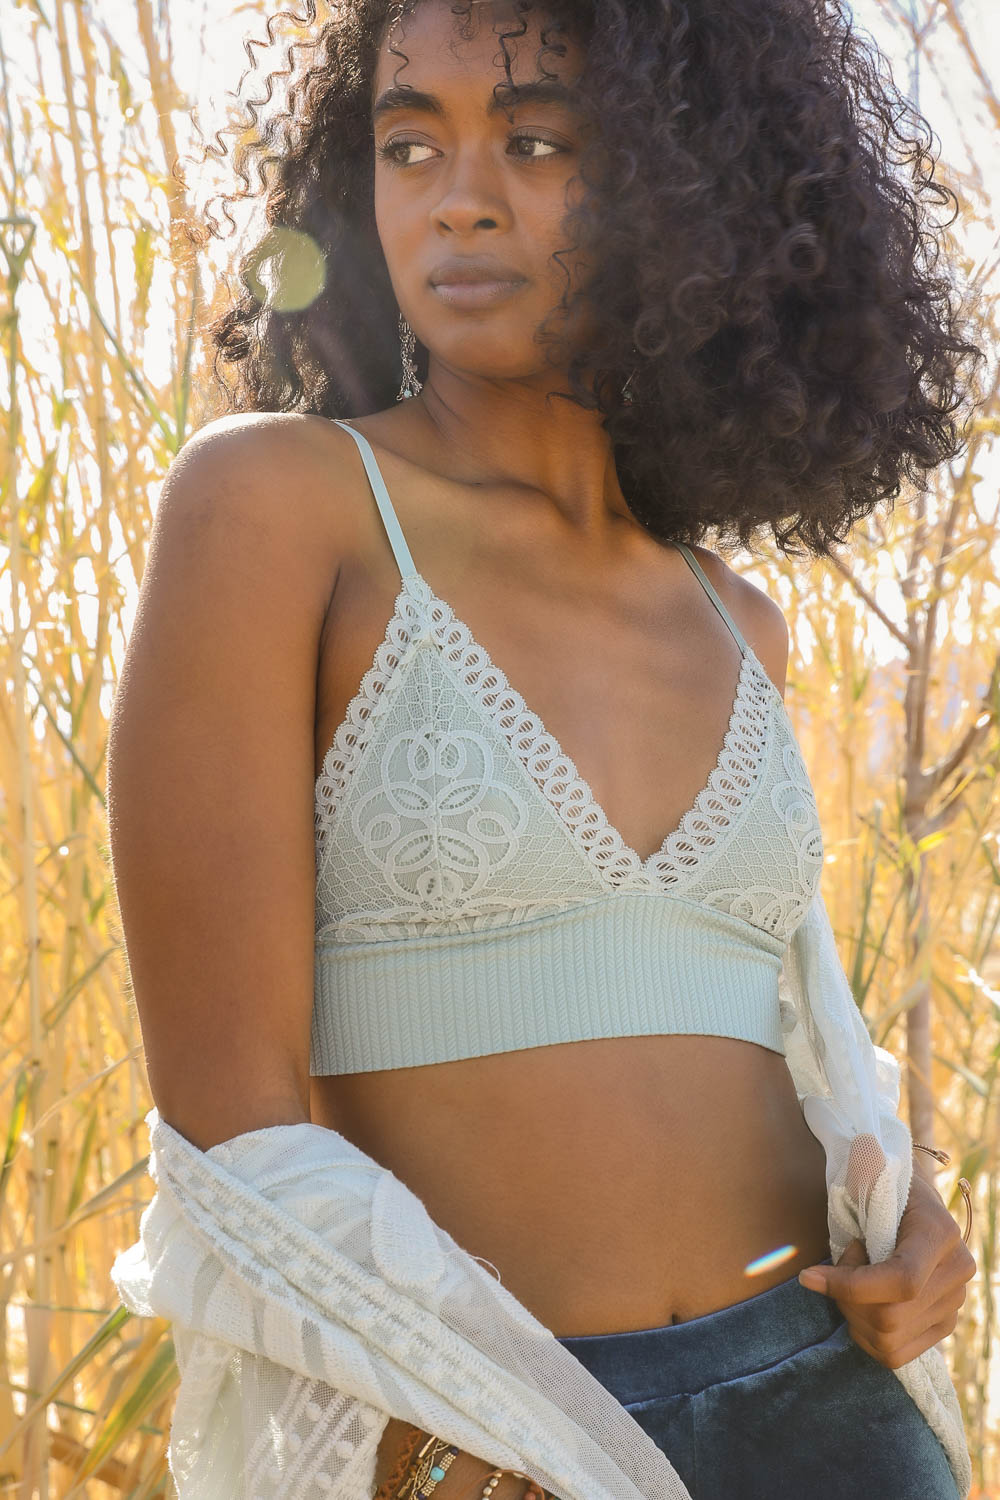 Leto Collection - Waistband Loop Lace Brami $22 – Thank you